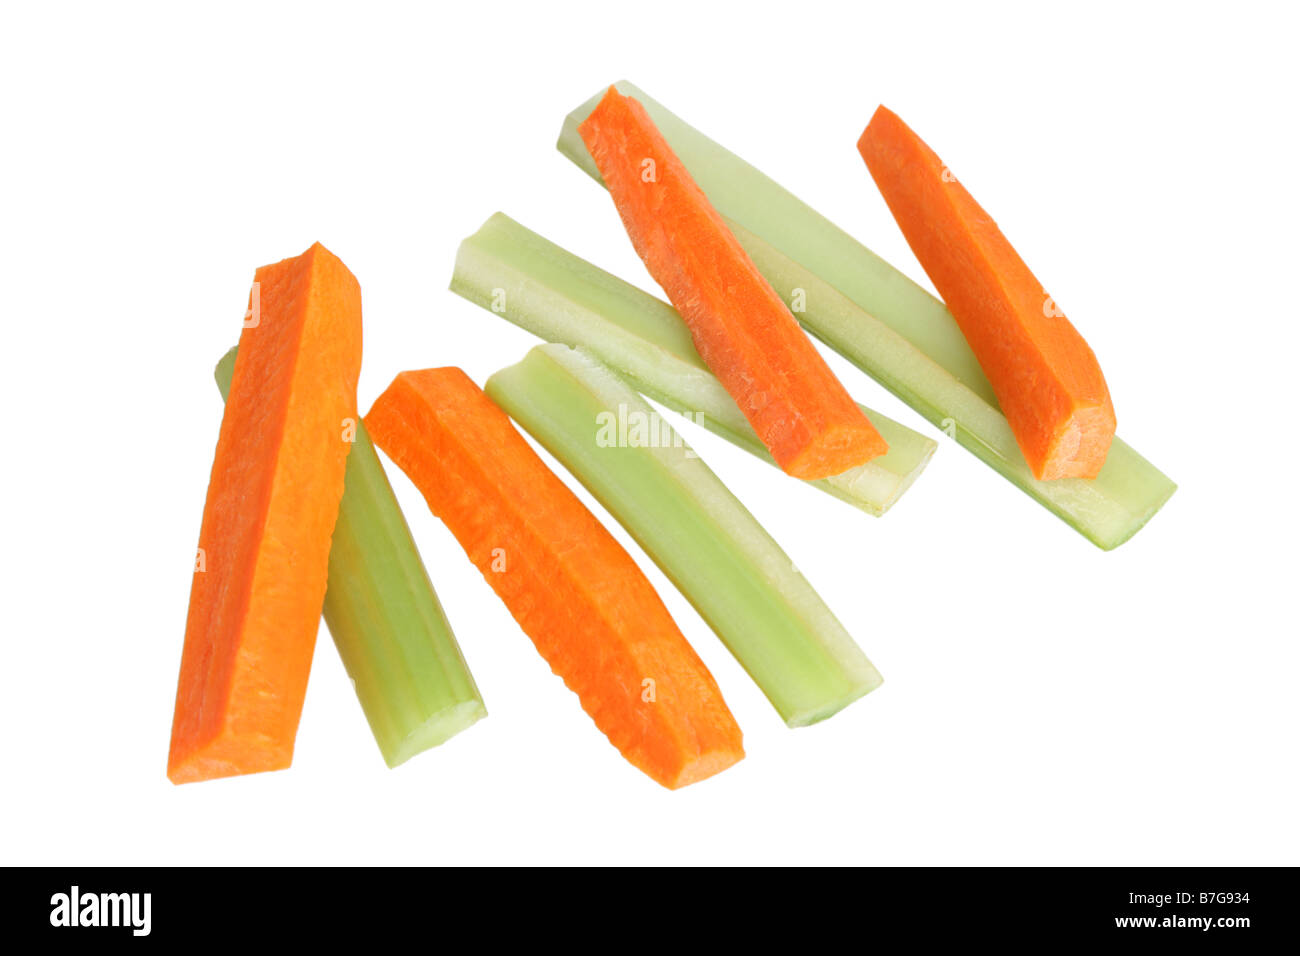 Celery and Carrot sticks cut out on white background Stock Photo